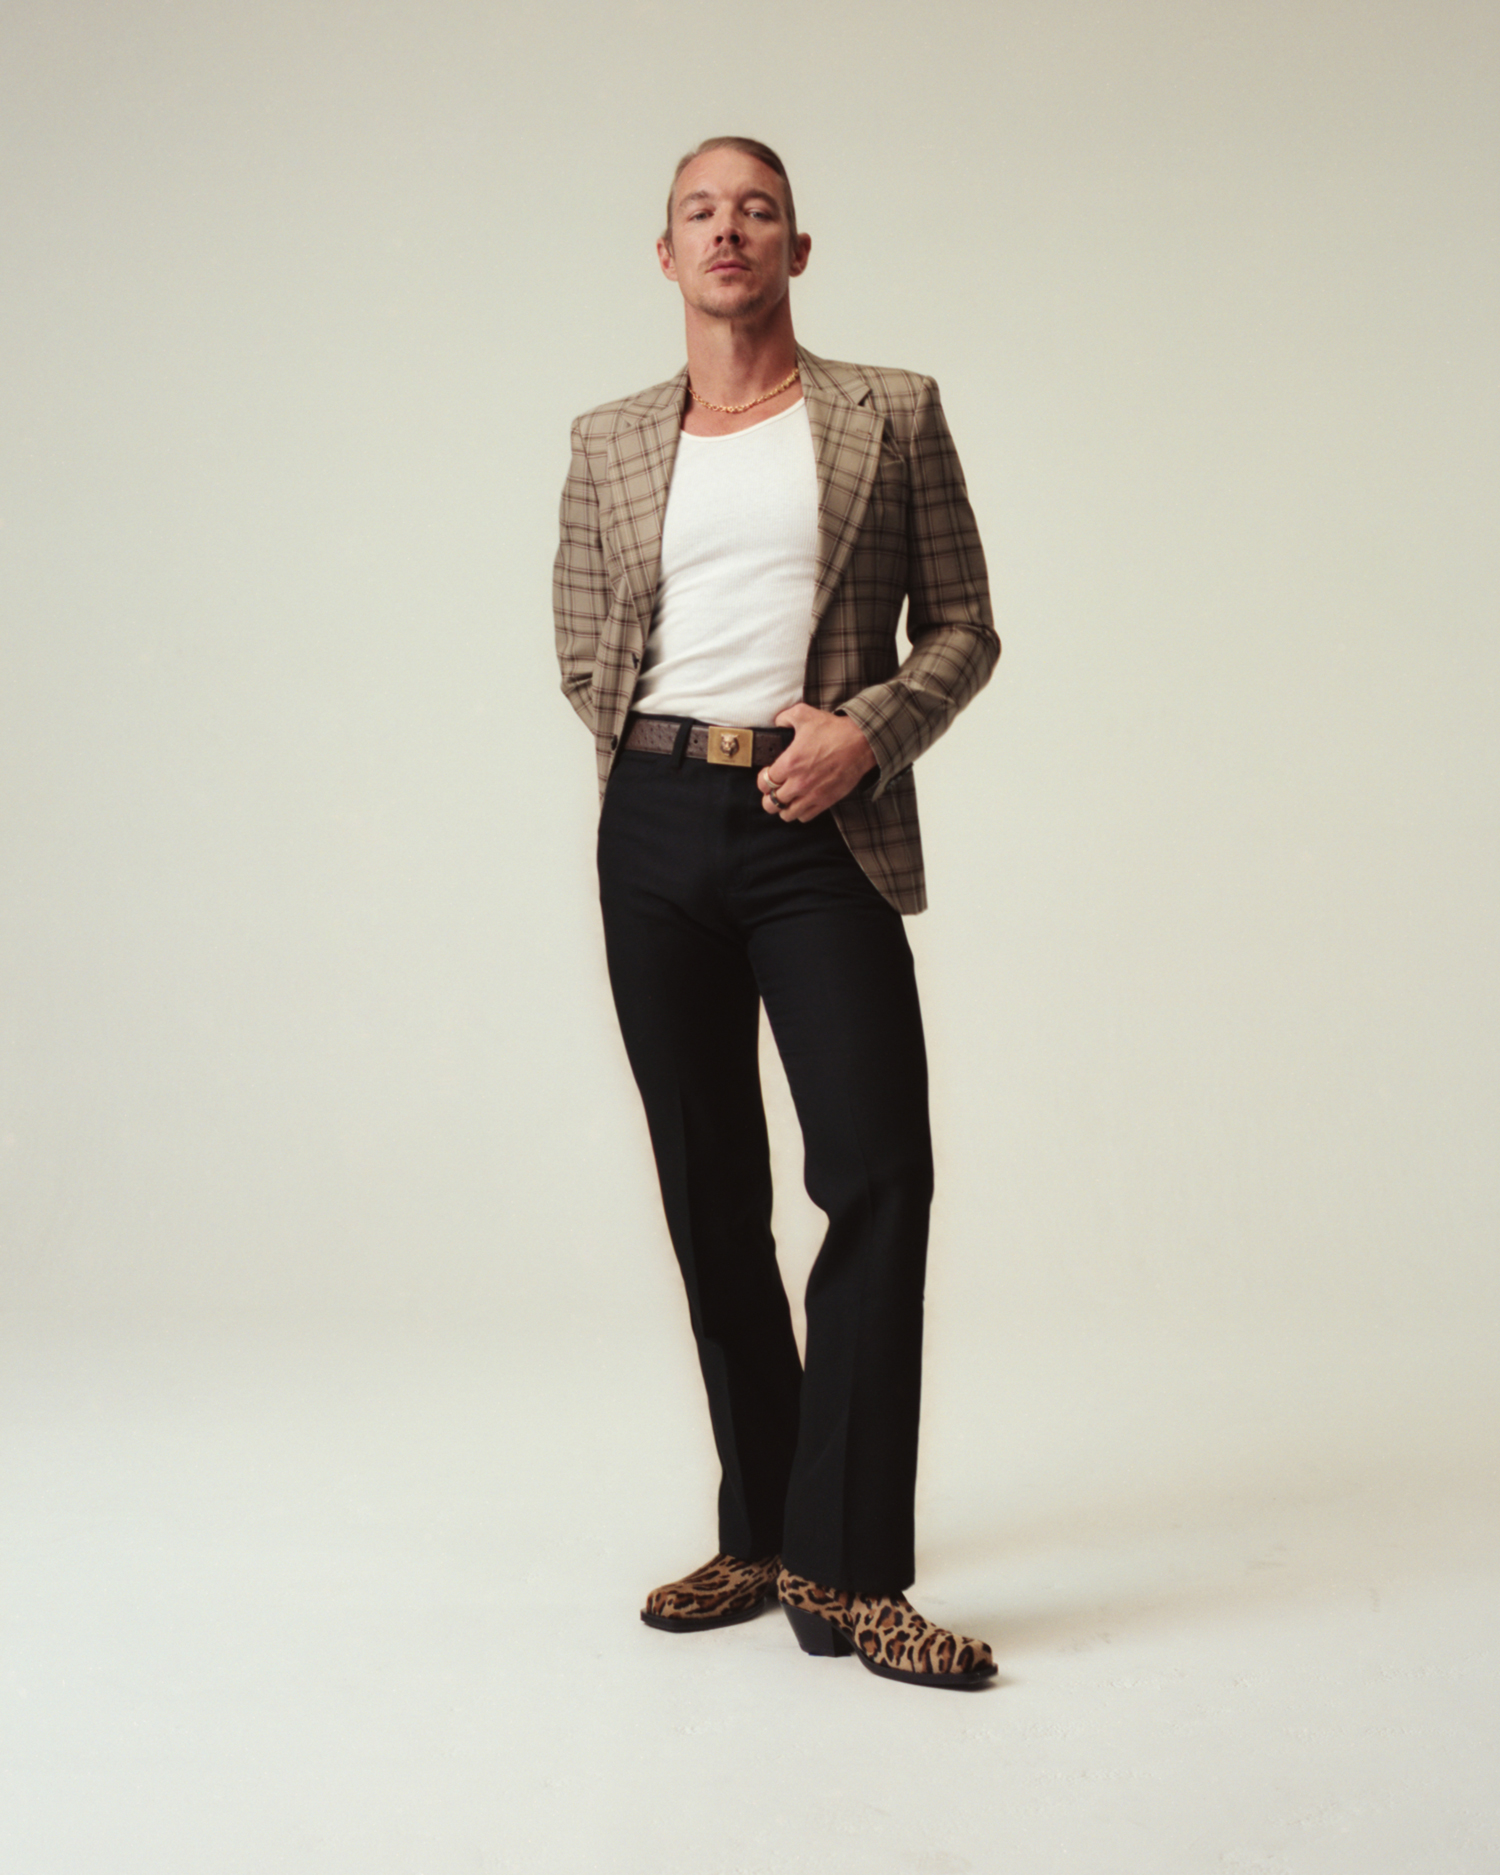 Diplo Tries on 15 Bootcut Pants in 15 Minutes - Interview Magazine